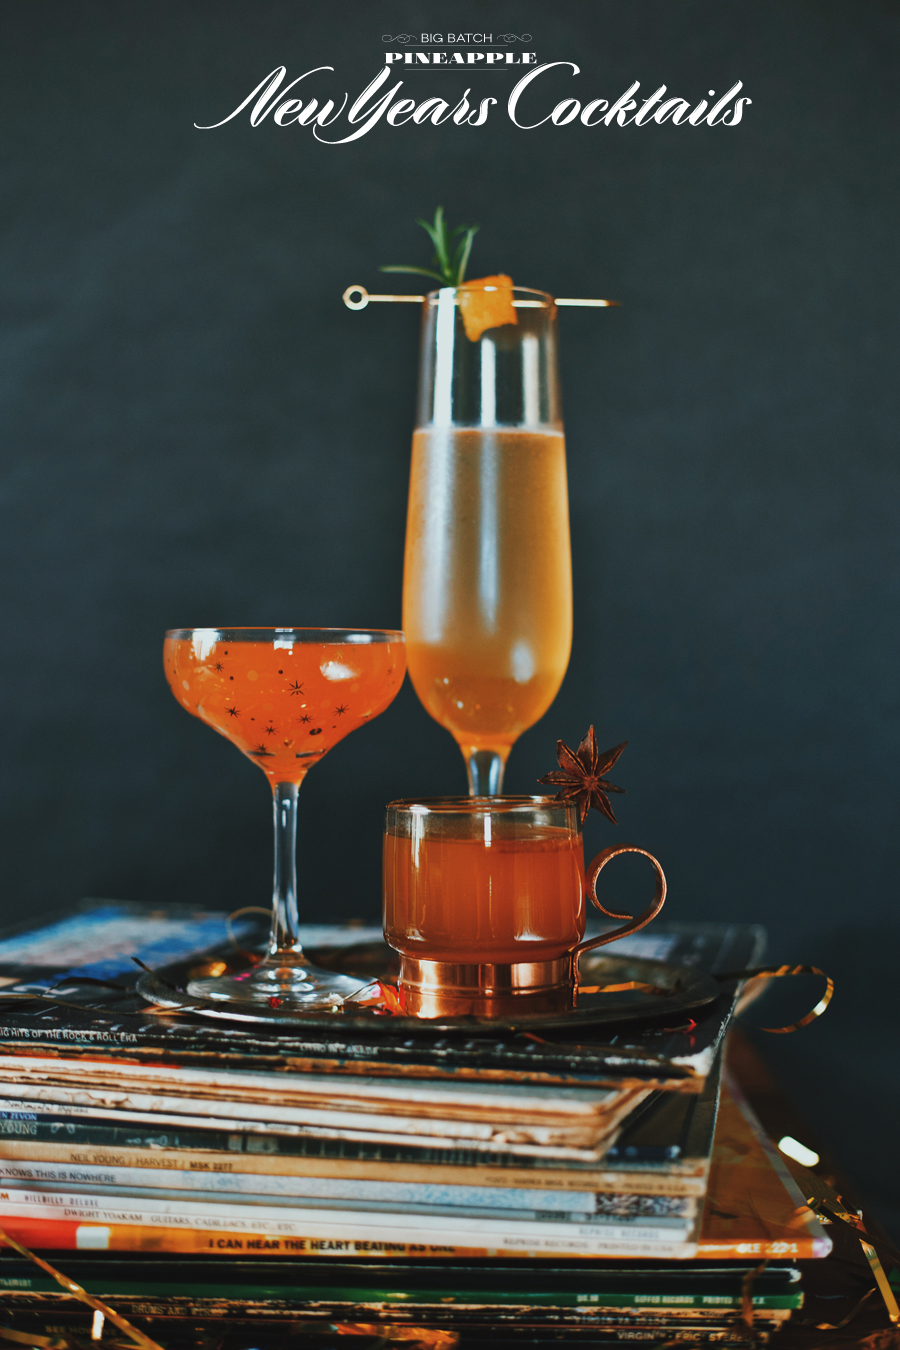 New Years Cocktails | Dine X Design